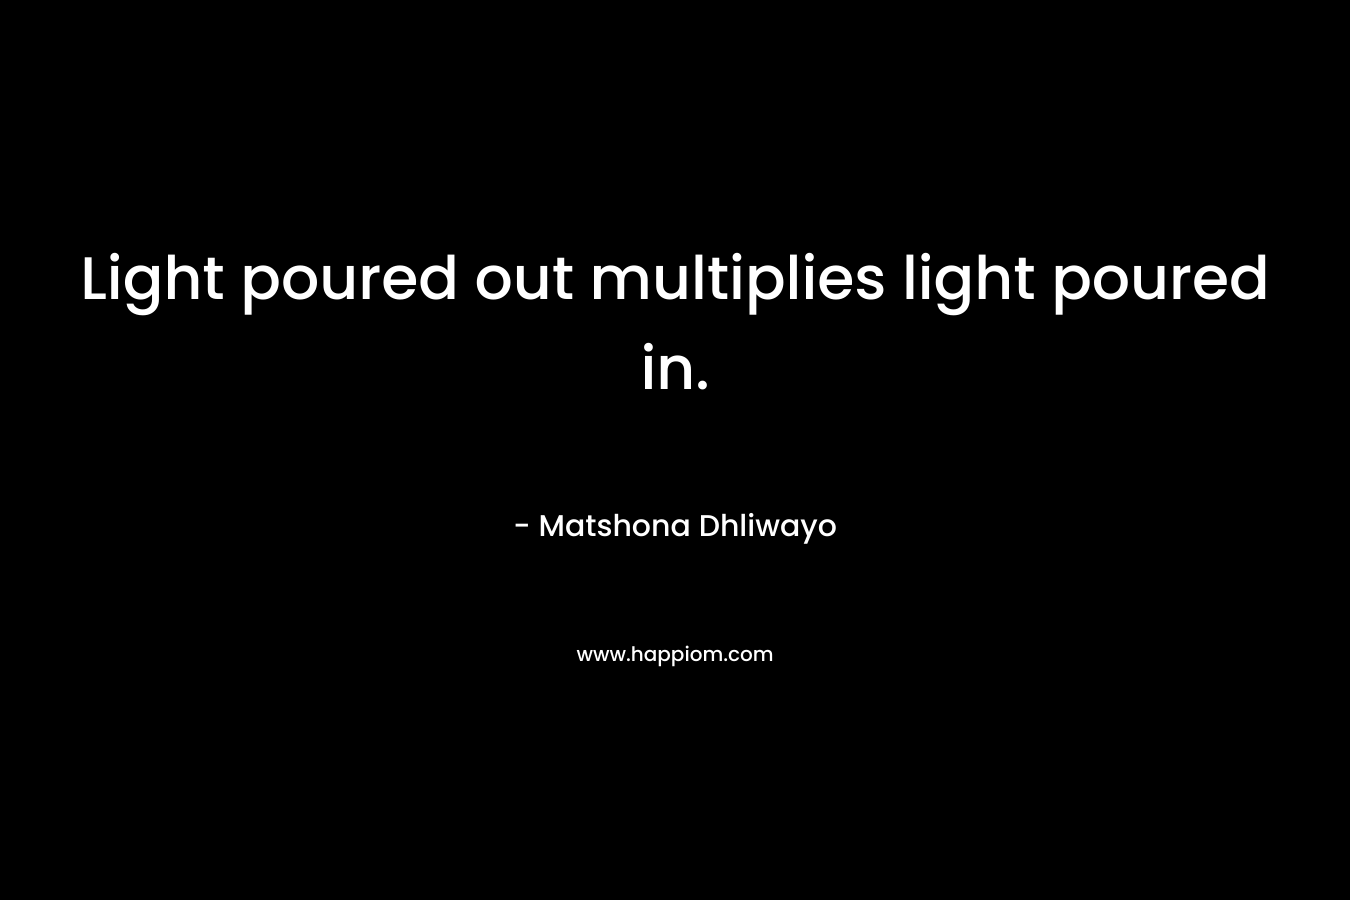 Light poured out multiplies light poured in. – Matshona Dhliwayo